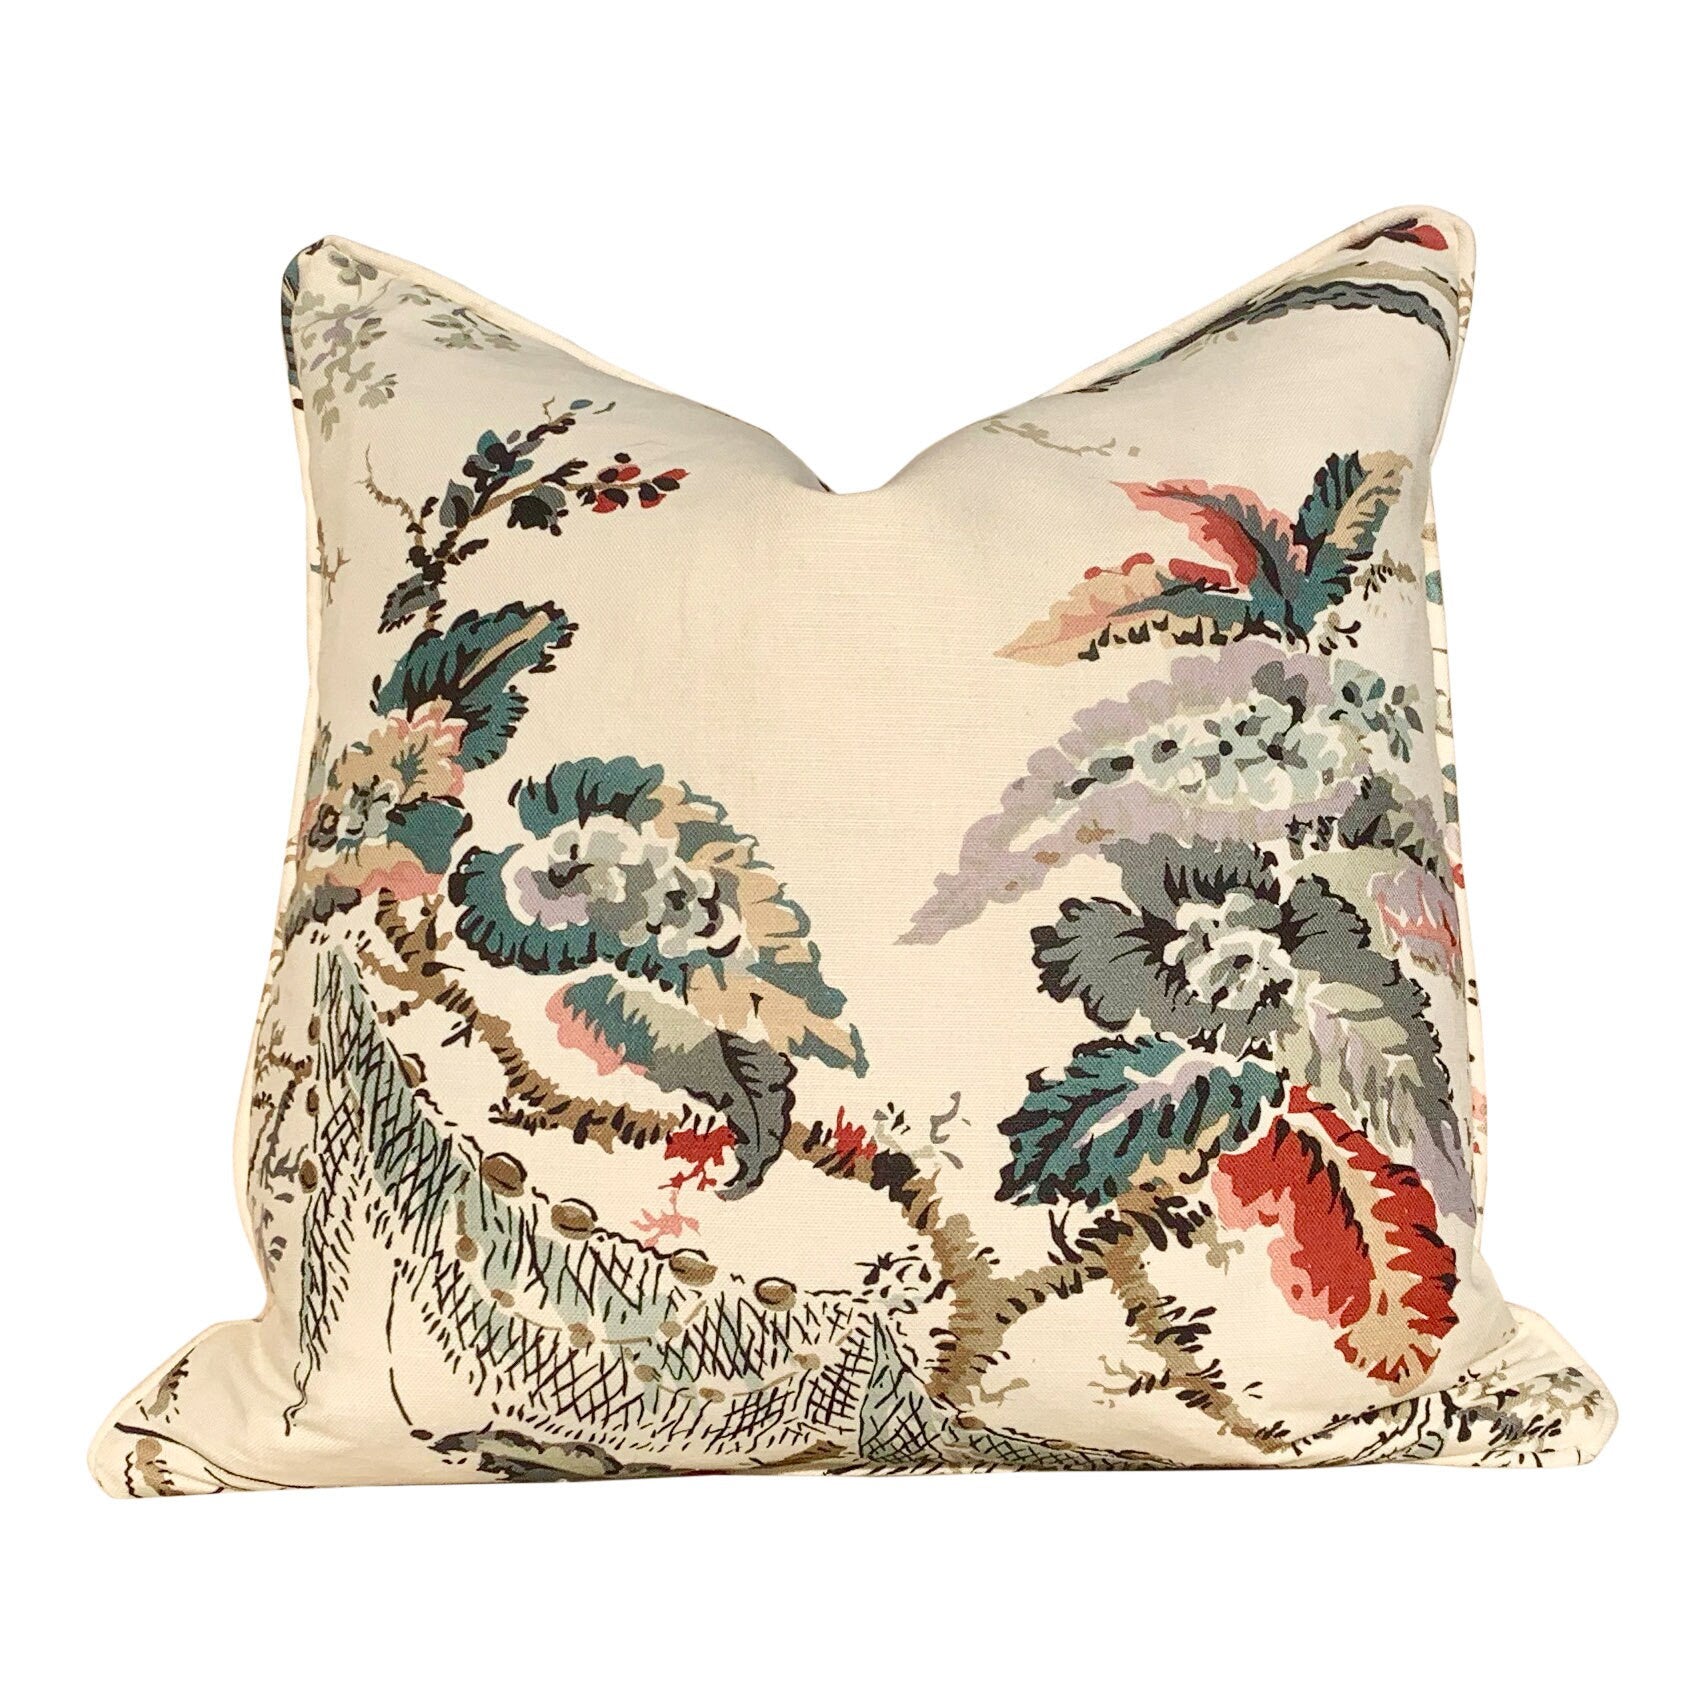 Thibaut Moorea Floral Linen Pillow in Cream and Red. Floral LInen Pillow, Lumbar Cream Red Pillow, Bedding Pillows, Ivory Cushion Cover